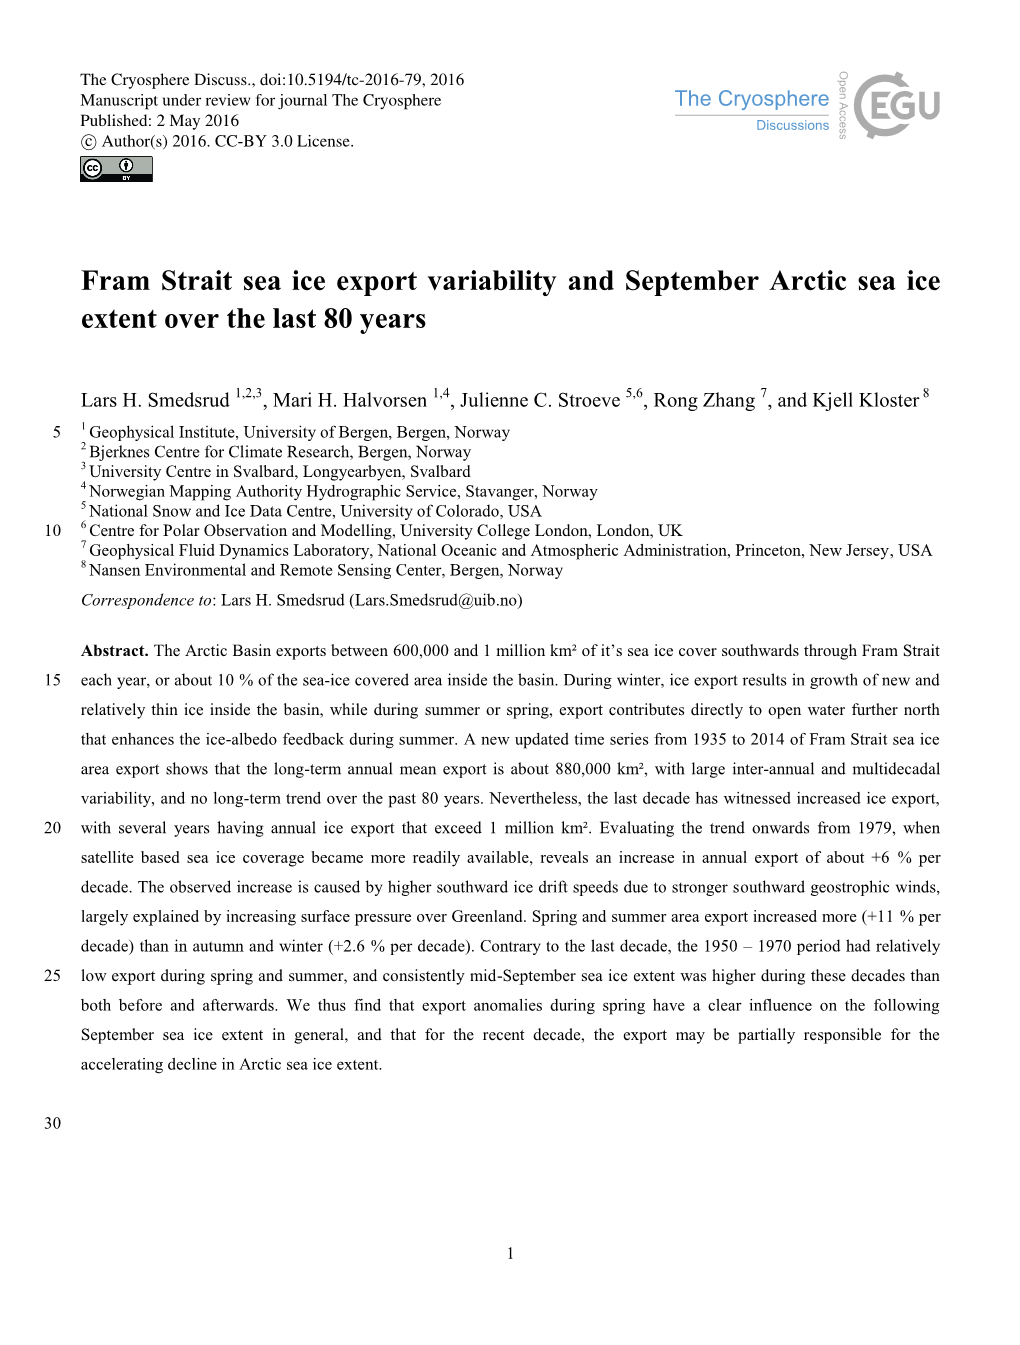 Fram Strait Sea Ice Export Variability and September Arctic Sea Ice Extent Over the Last 80 Years